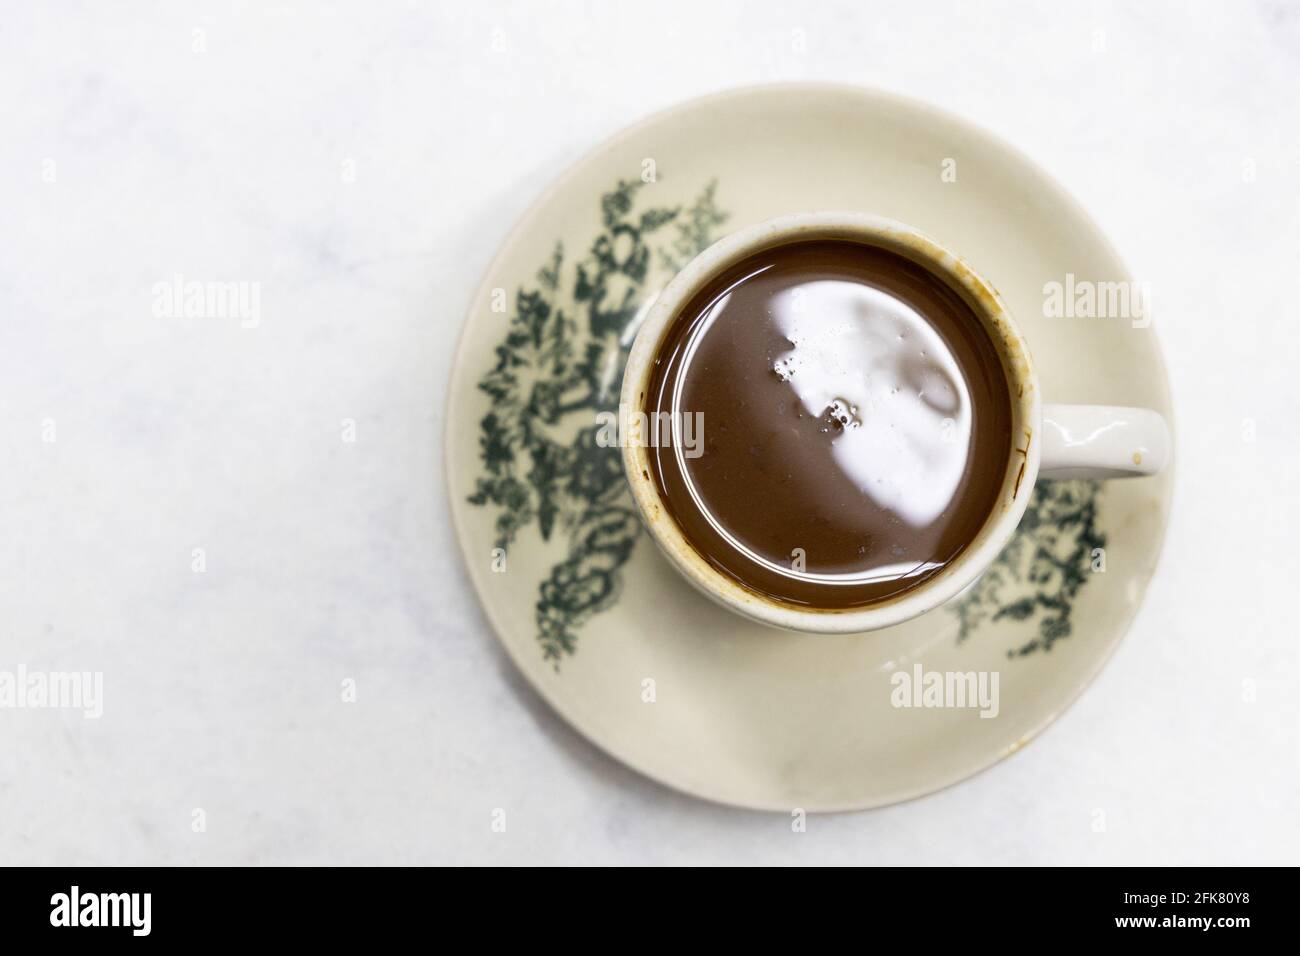 Overhead view on serving of classic retro cup of coffee at kopitiam or old coffee shop Stock Photo